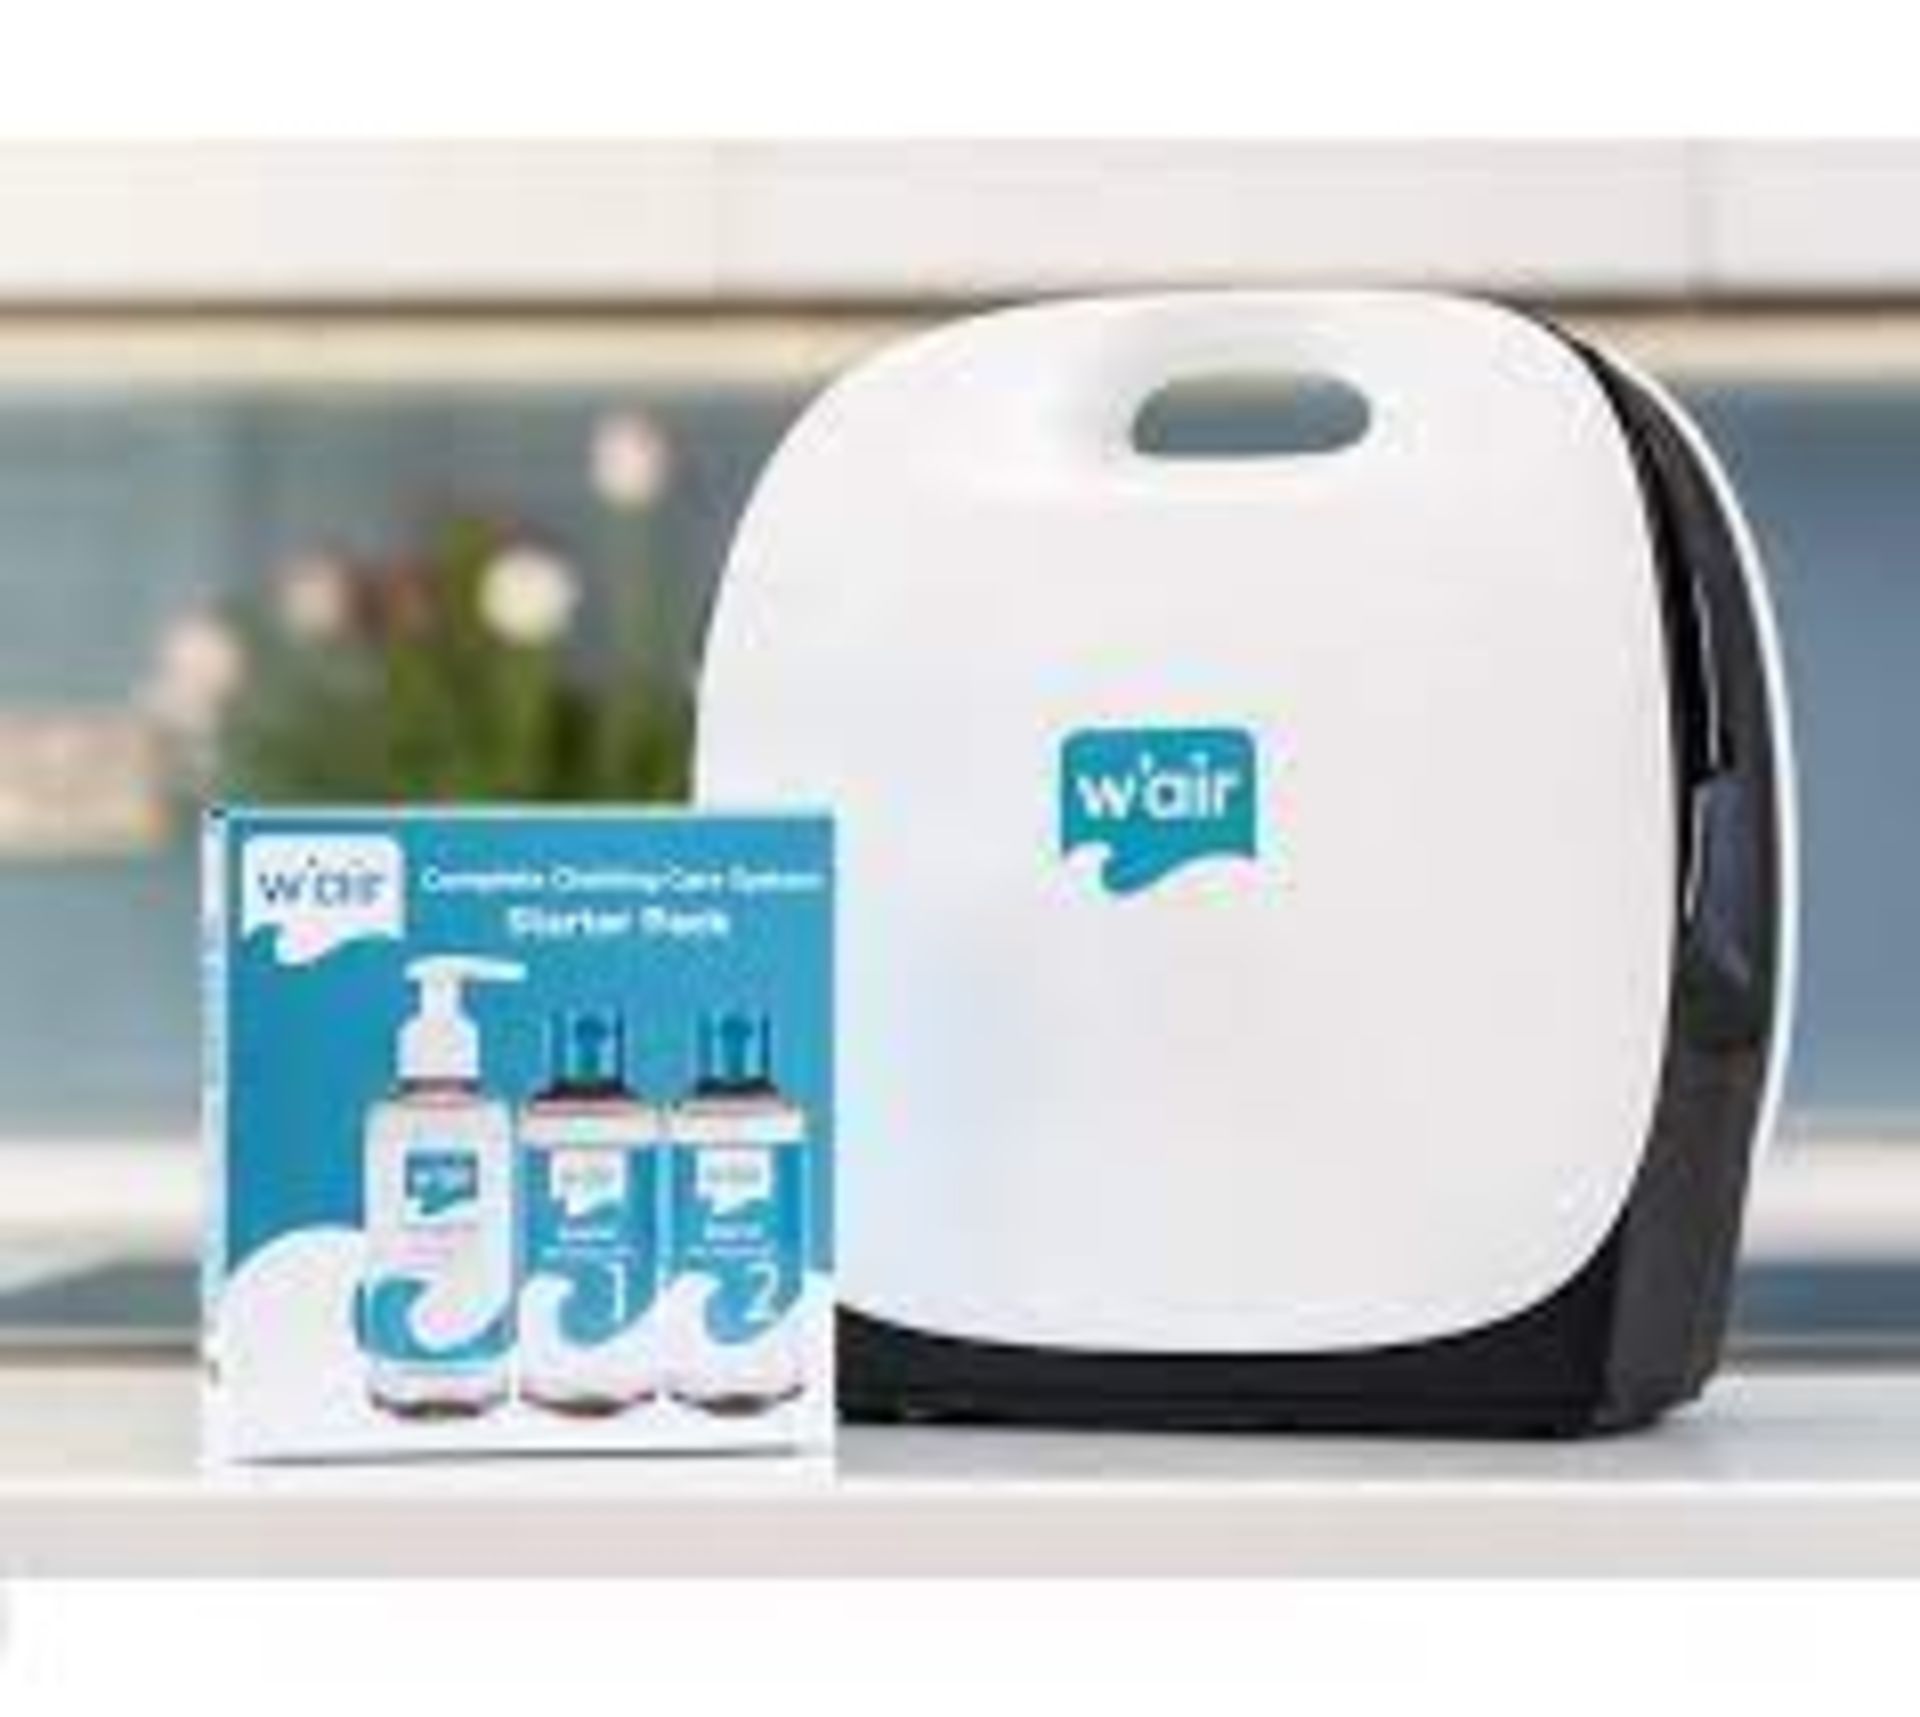 BRAND NEW W'AIR SNEAKER CLEANING SYSTEMS RRP £299, The w'air uses hydrodynamic technology - Image 5 of 6